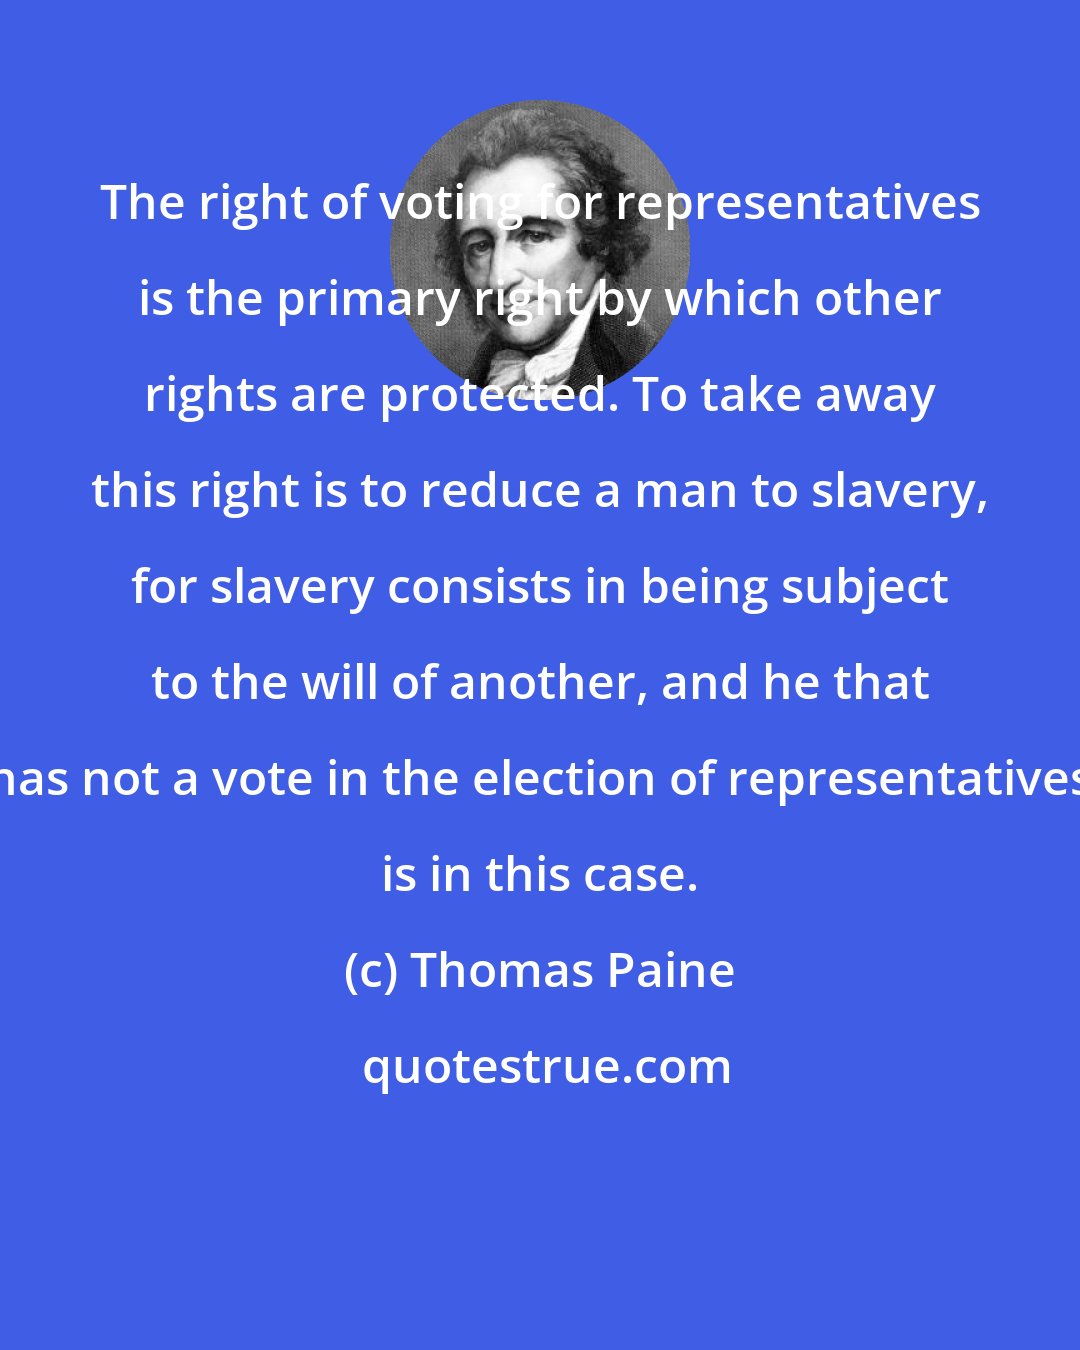 Thomas Paine: The right of voting for representatives is the primary right by which other rights are protected. To take away this right is to reduce a man to slavery, for slavery consists in being subject to the will of another, and he that has not a vote in the election of representatives is in this case.